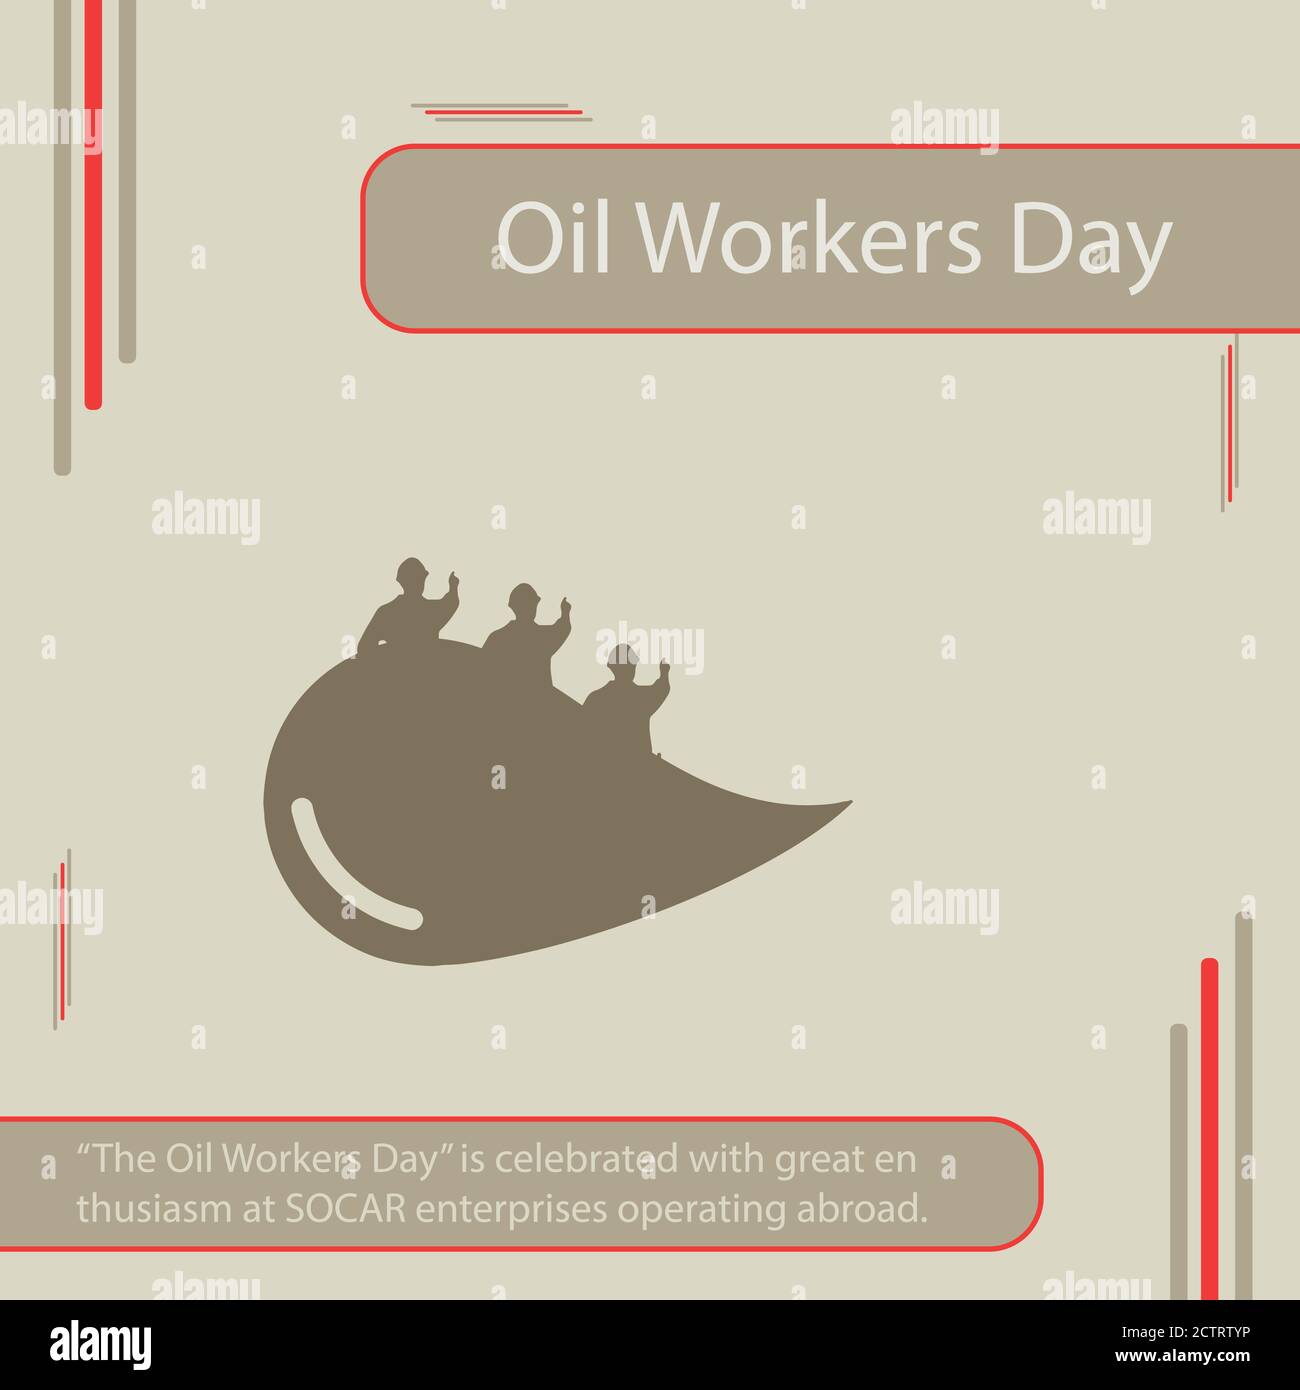 The Oil Workers Day is celebrated with great enthusiasm at SOCAR enterprises operating abroad. Stock Vector